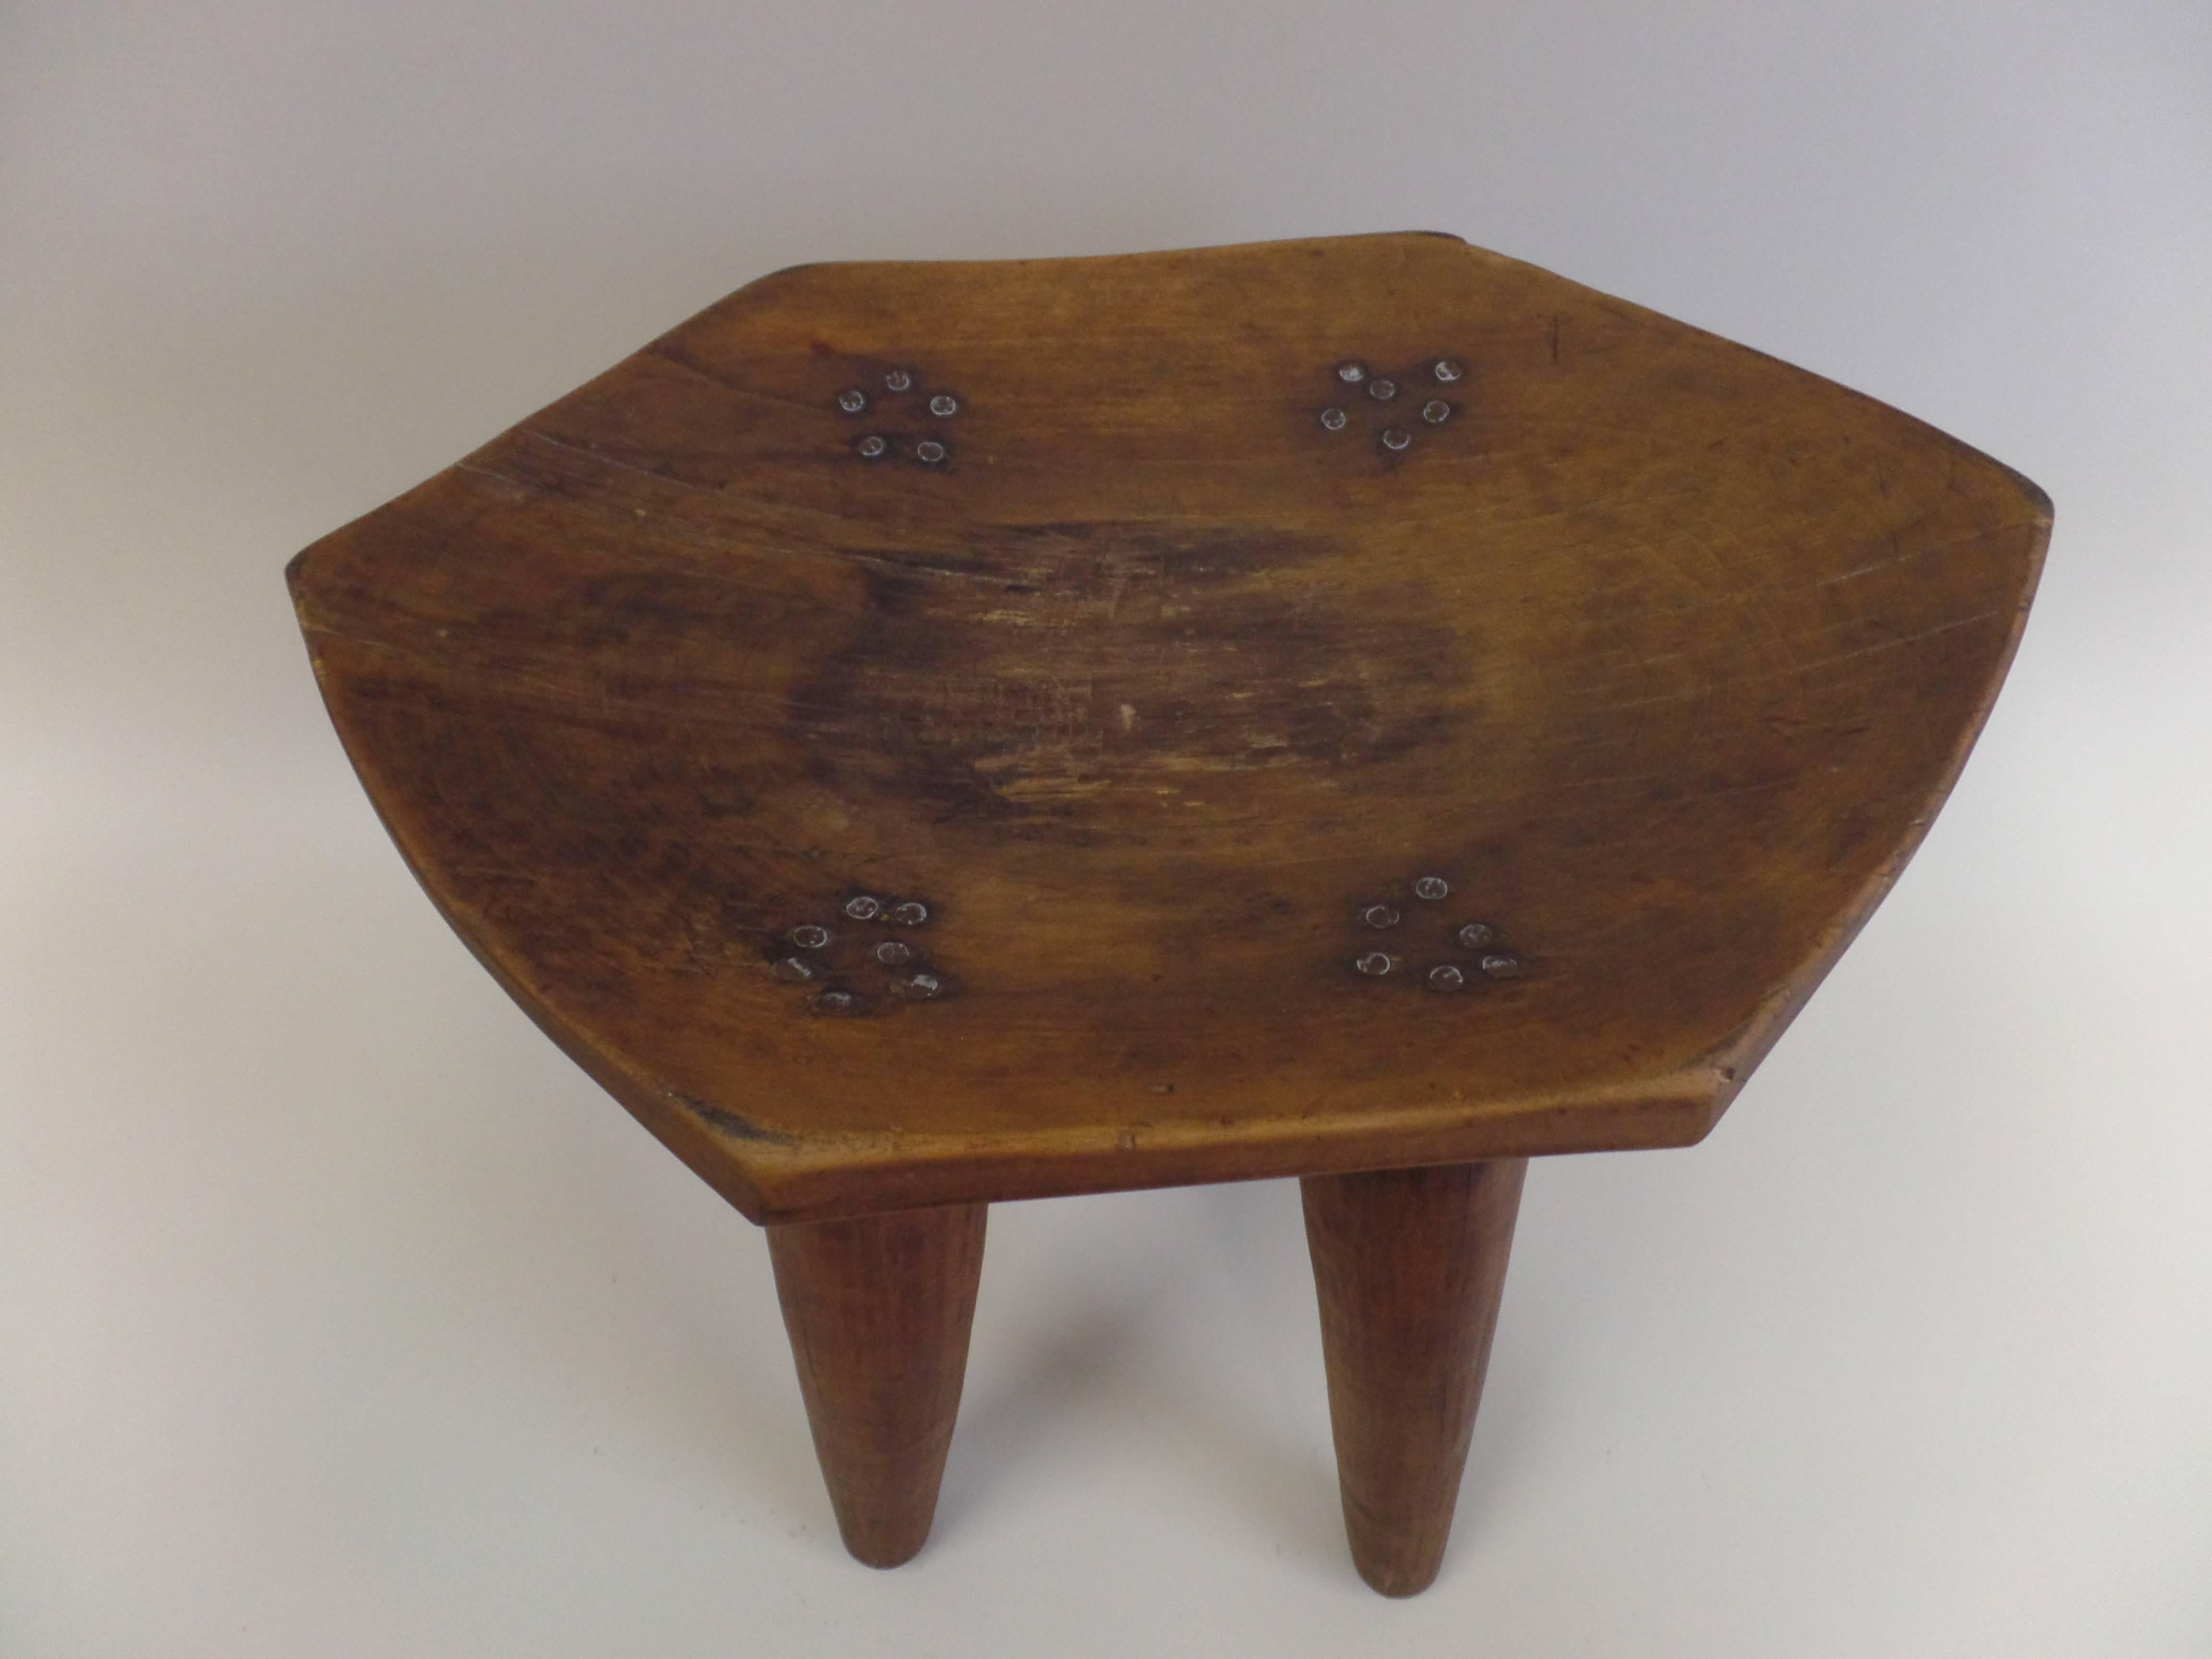 A hand-carved French stool or bench with the six-sided seat 'scooped out' the piece reflects an interest during the Art-Deco and Post Art Deco periods (1920-1930s) in a sober, modern presentation along with interest in the naturalism non-Western